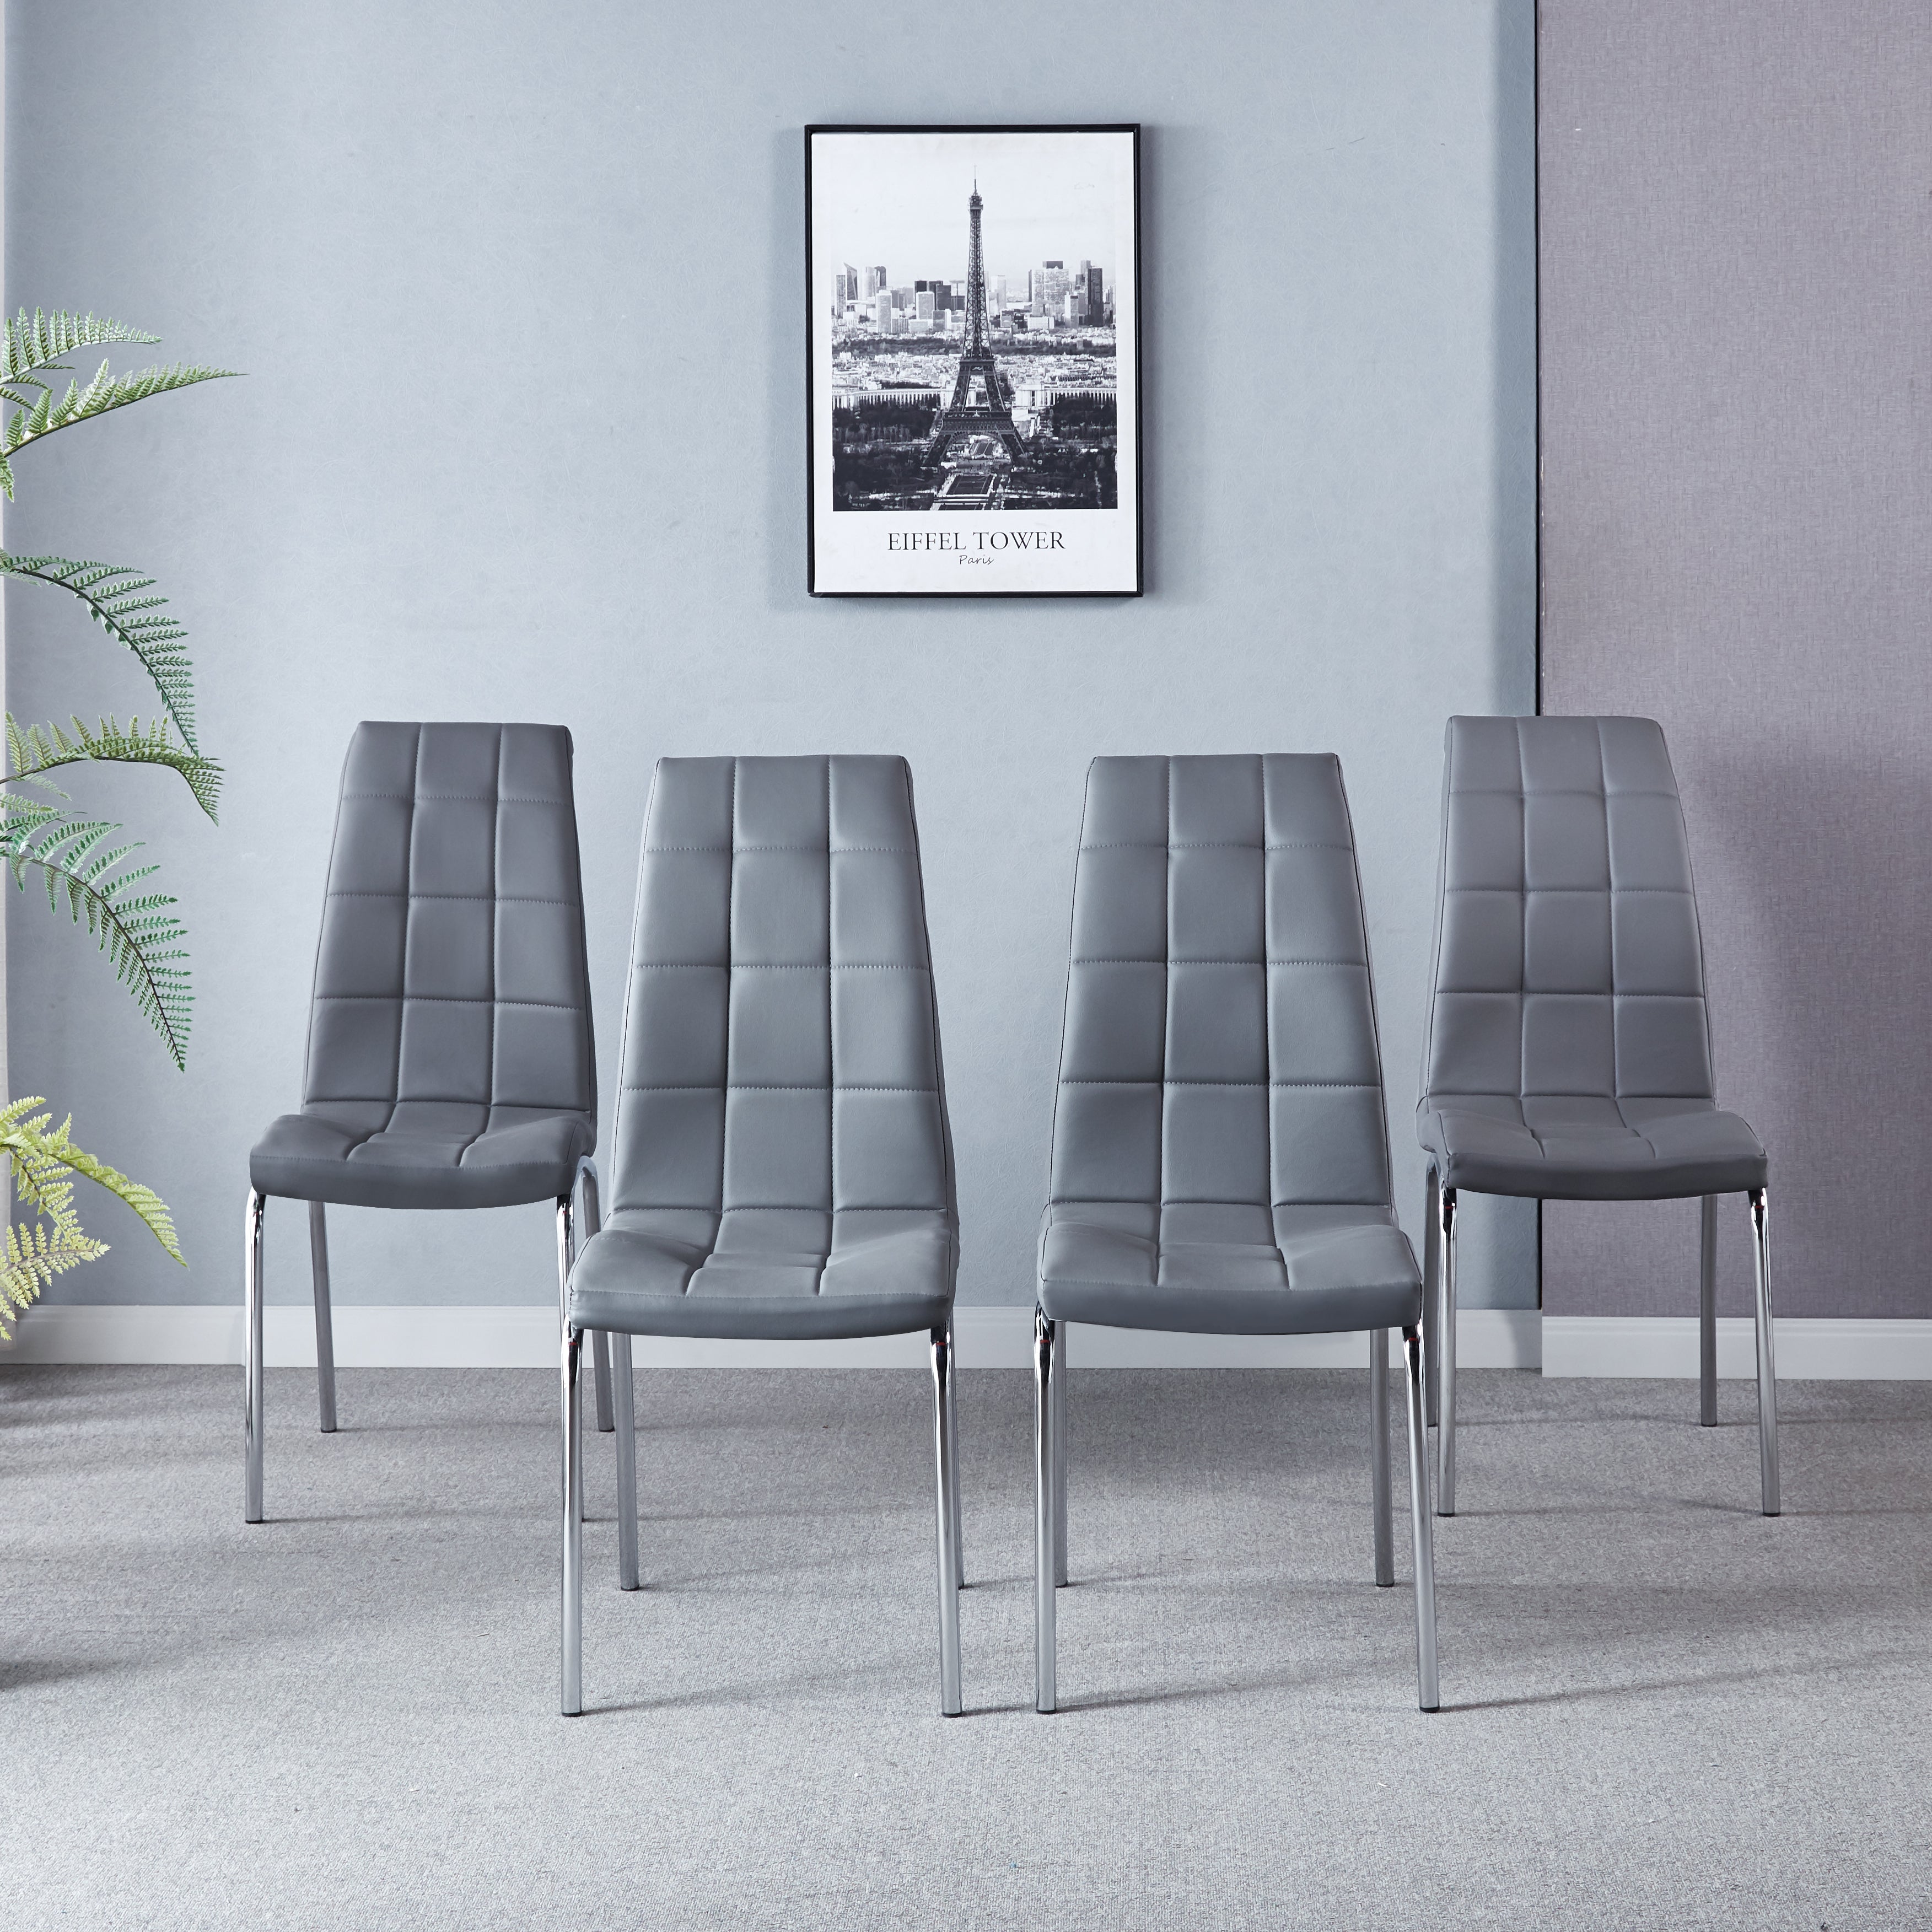 Alwynp Home Dining Chair (Set of 4)